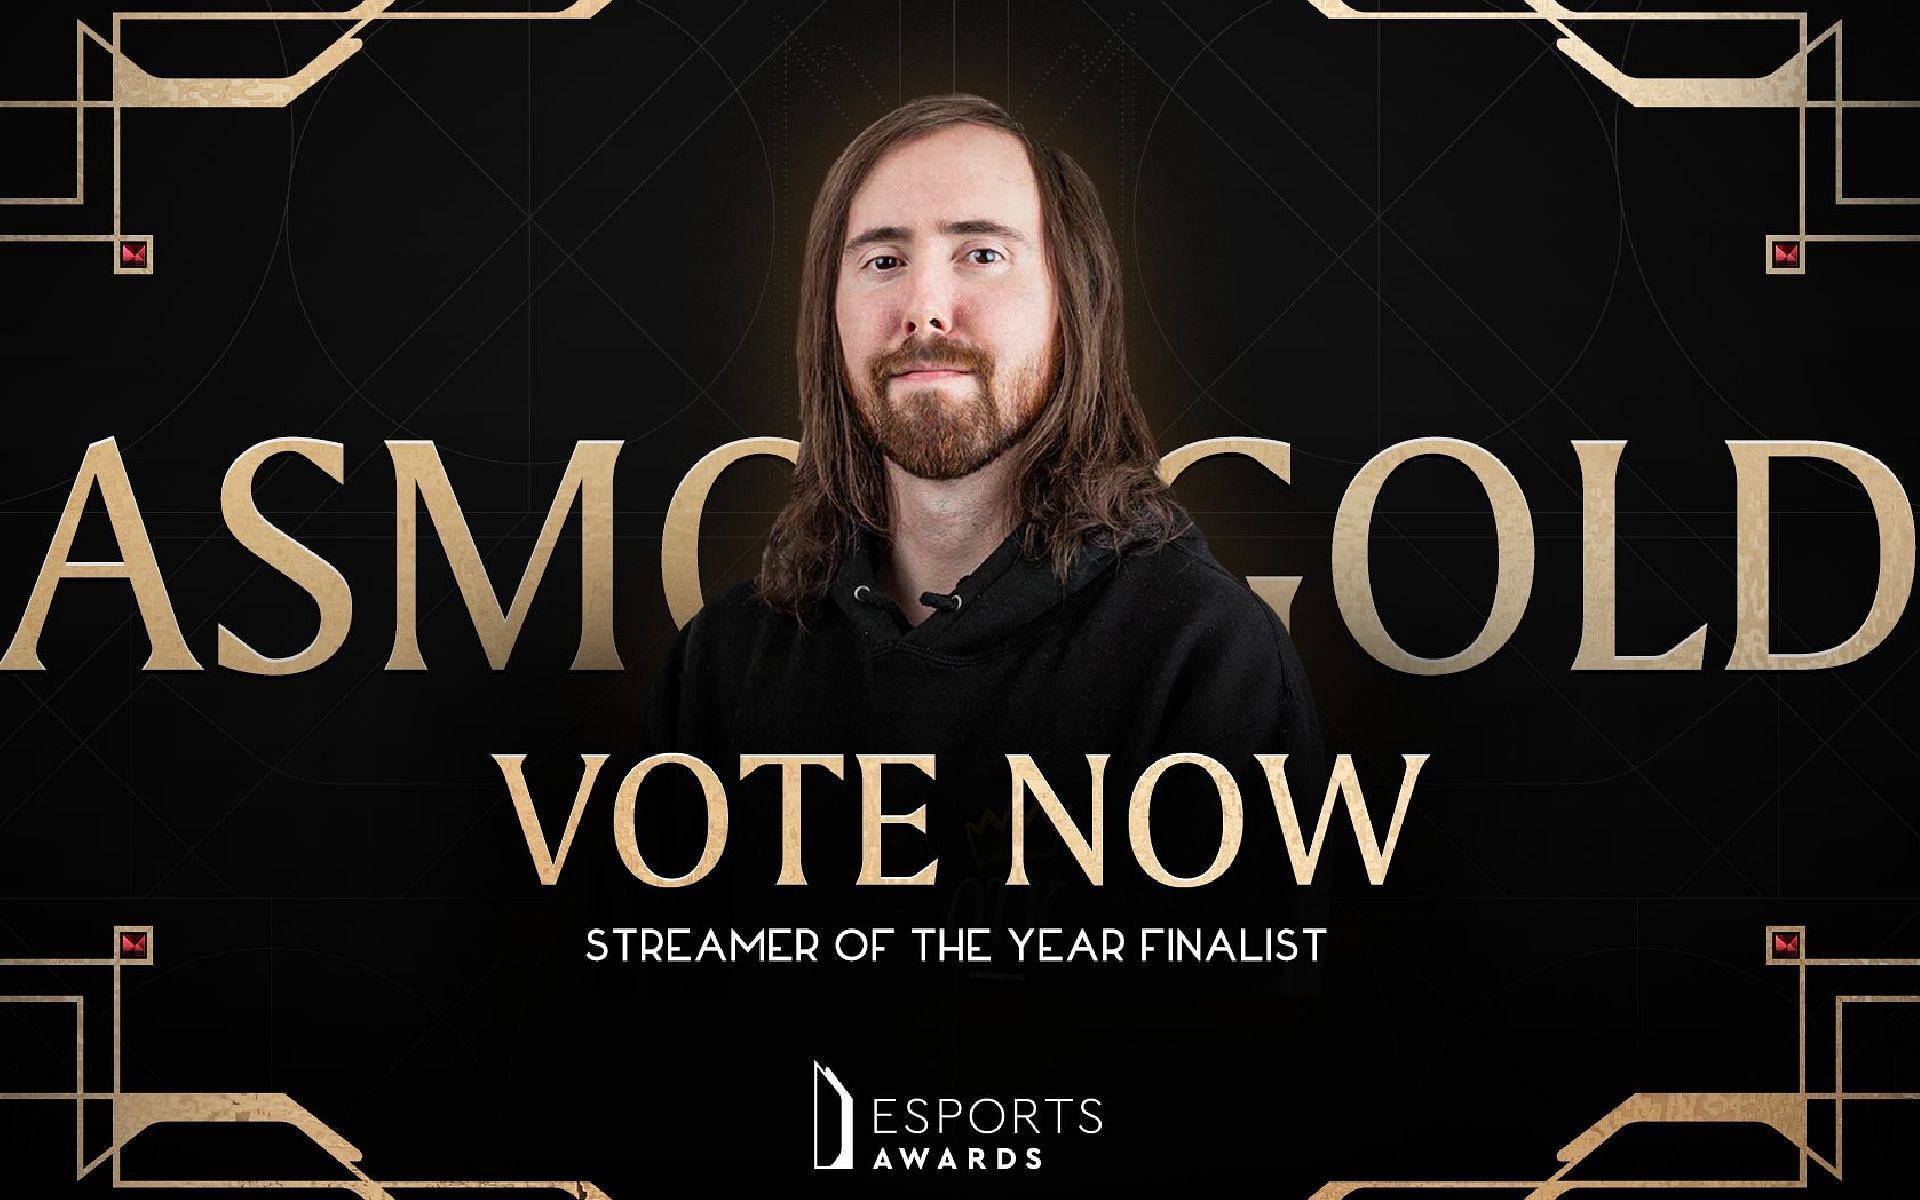 Asmongold provides his take on getting nominated for Streamer of the